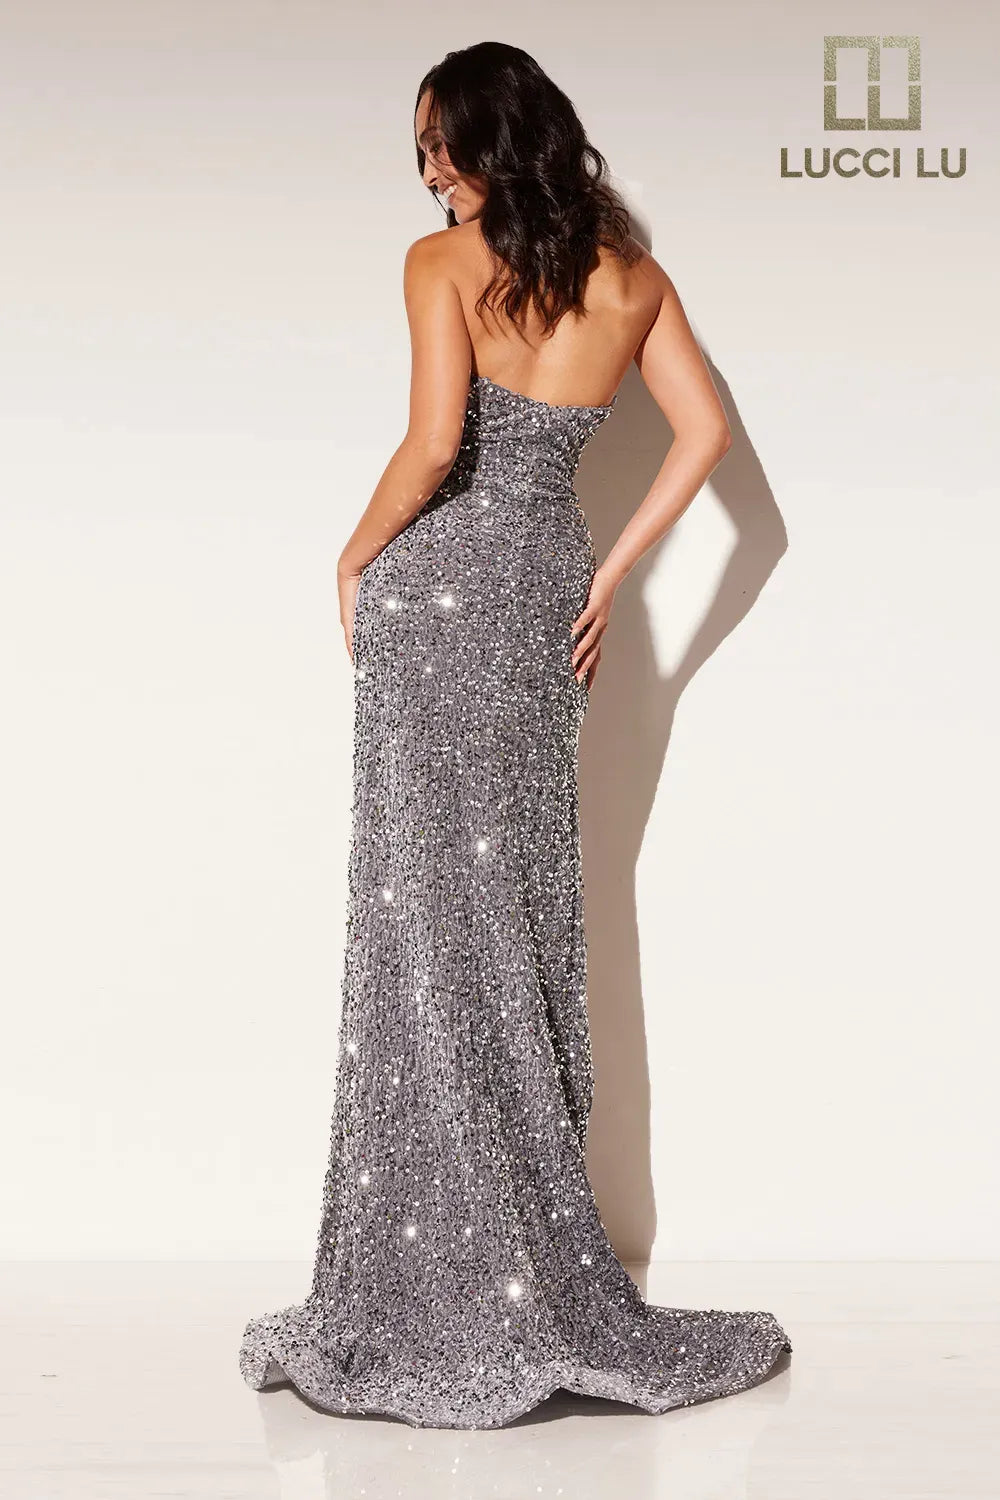 Step into the spotlight with the Lucci Lu Sequin Velvet Strapless Formal Pageant Dress. This stunning gown features a crystal-embellished bodice and a high slit for added drama. The strapless peak point neckline adds a touch of elegance, making it the perfect choice for your next formal event or prom night.  Sizes: 0-18  Colors: Purple, Magenta, Royal Blue, Silver